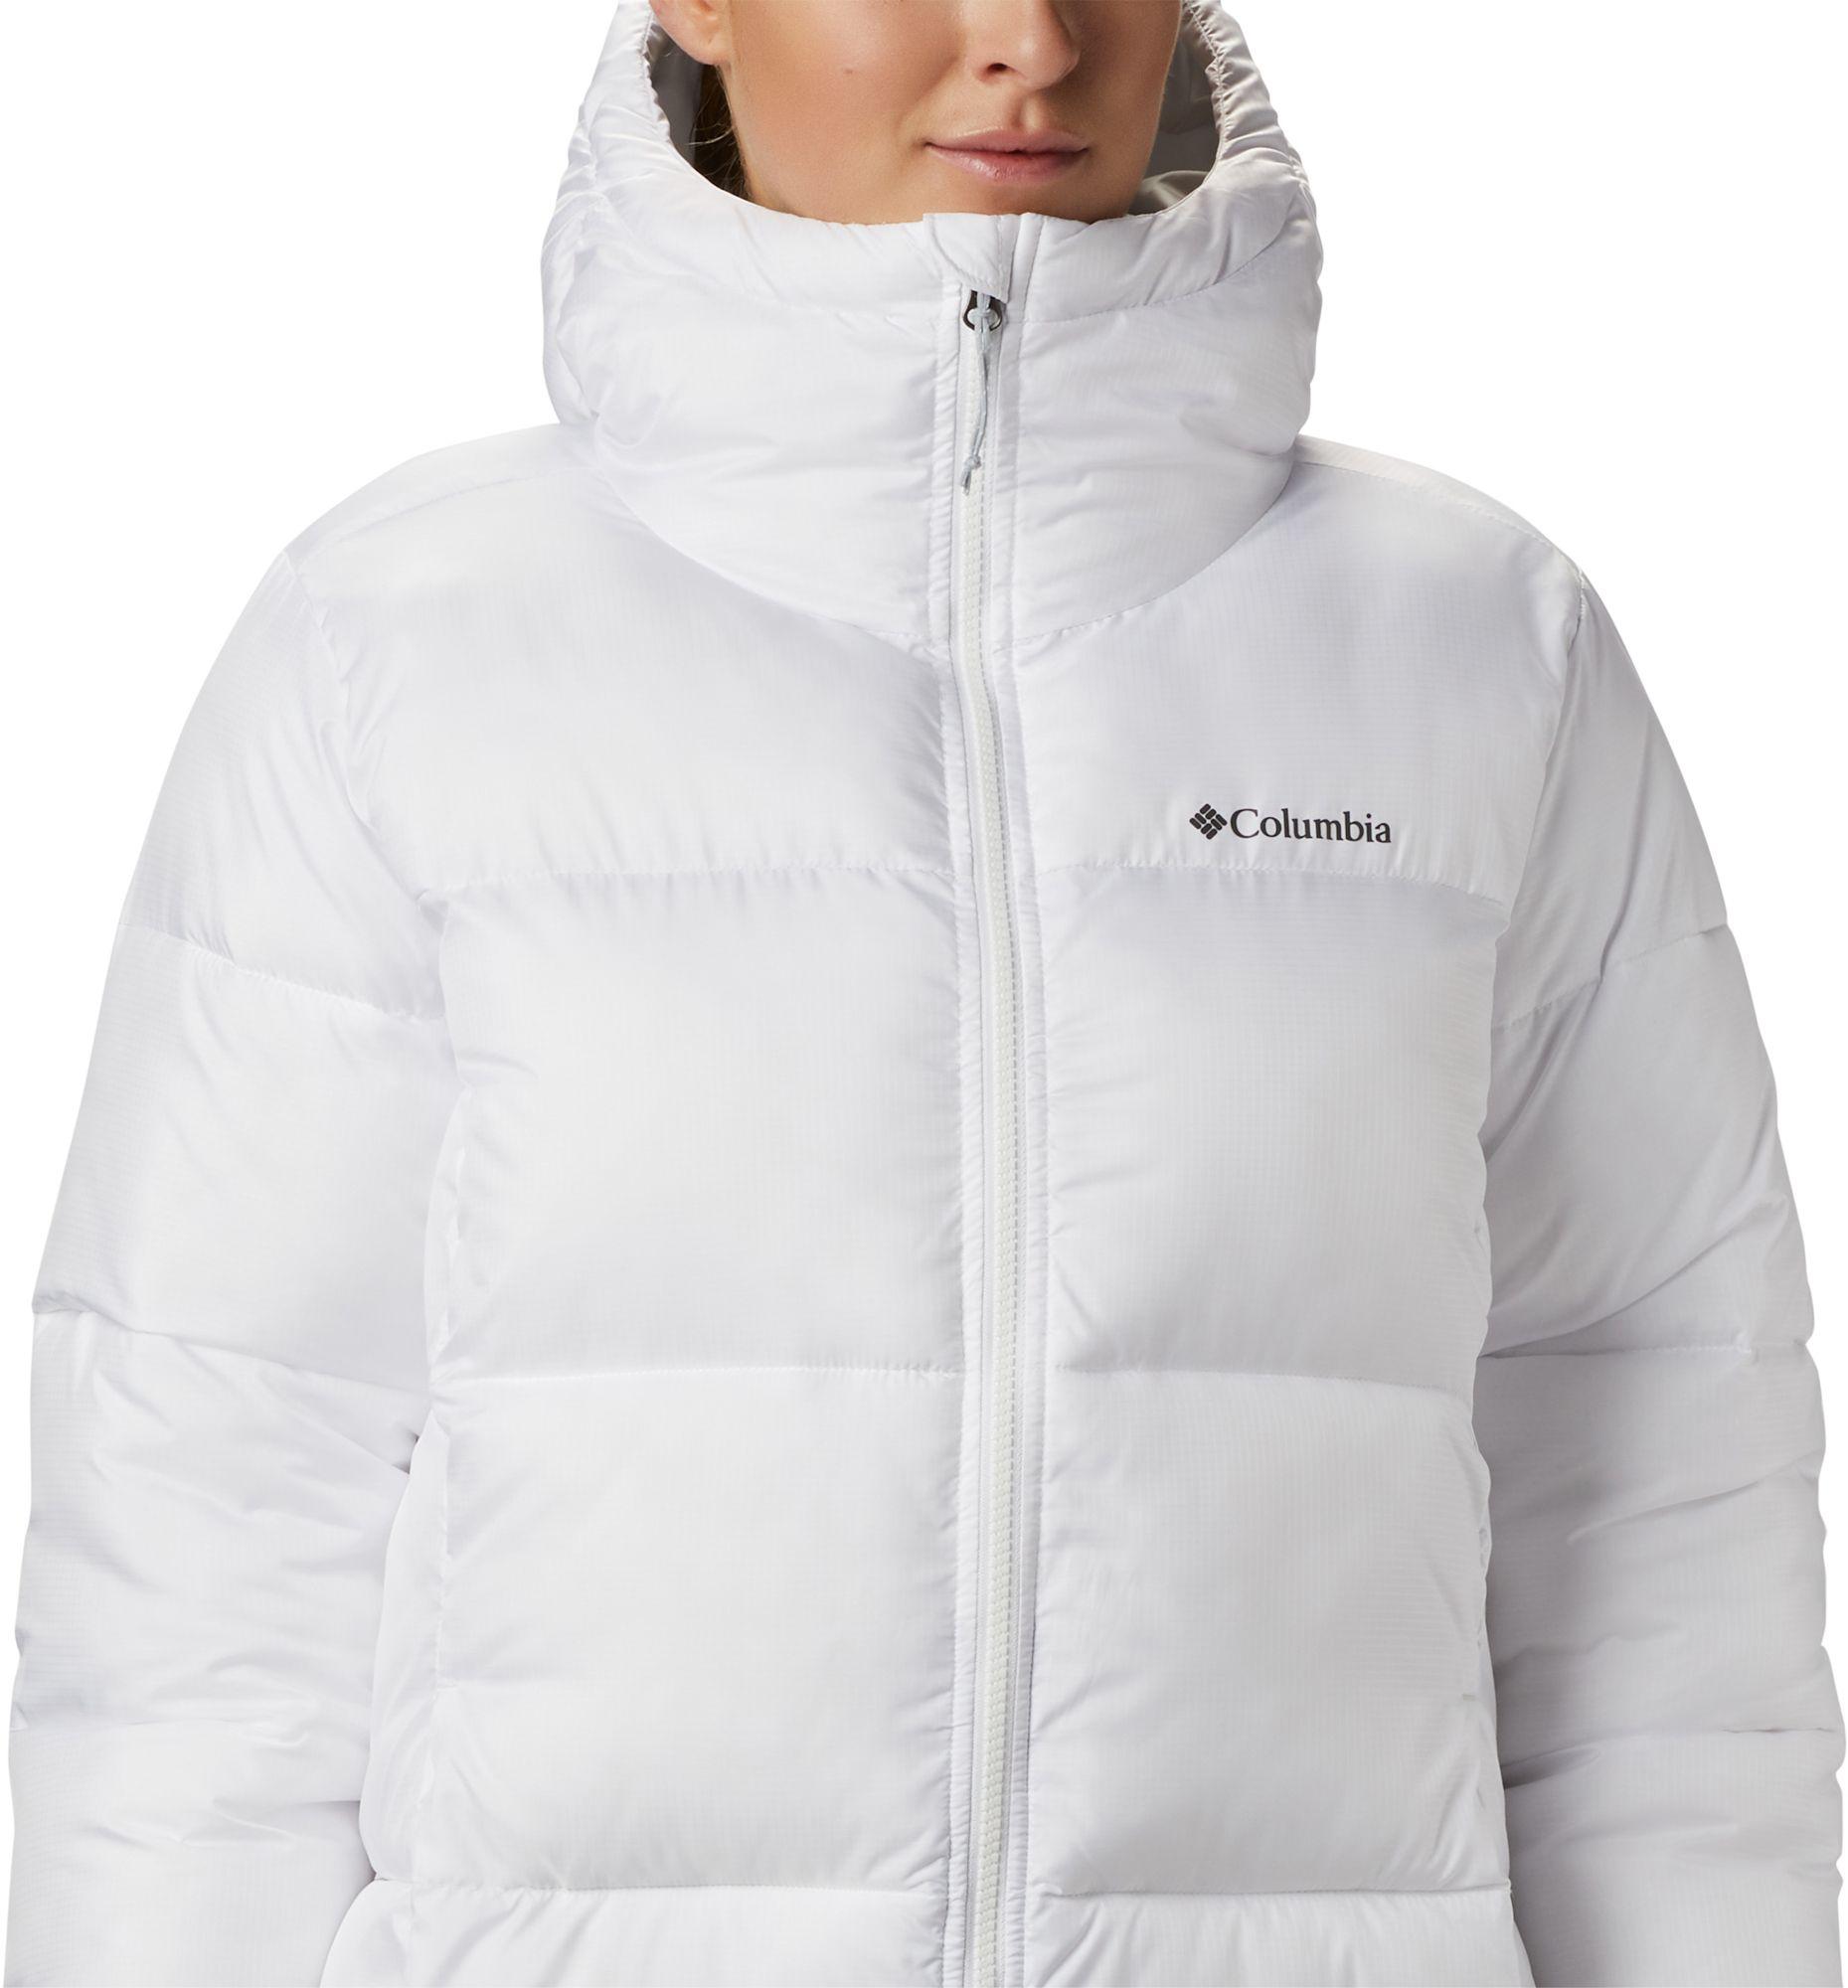 White Columbia Puffer Jacket Outlet, 56% OFF | www.colegiogamarra.com